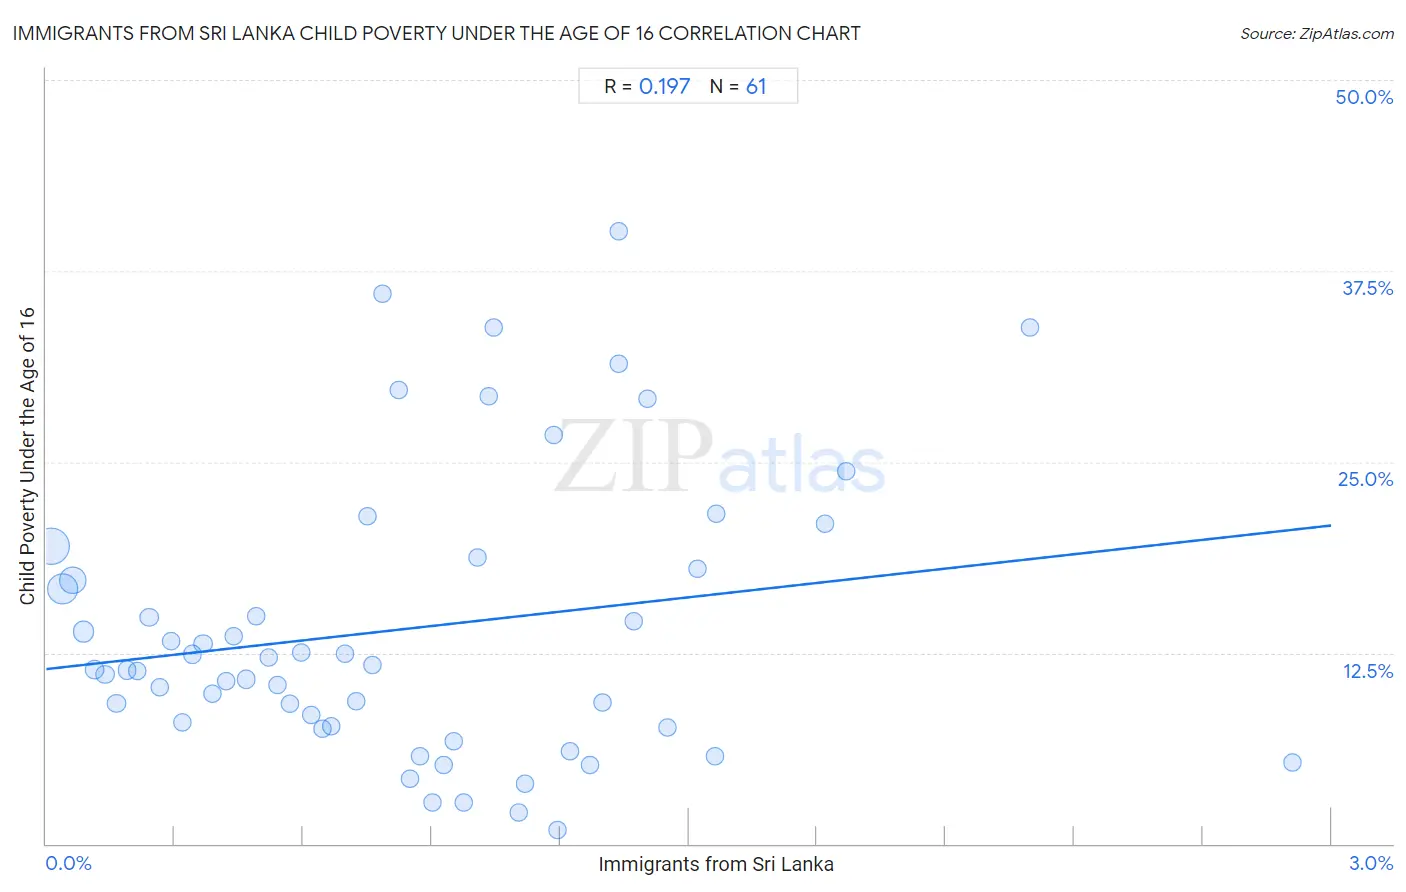 Immigrants from Sri Lanka Child Poverty Under the Age of 16